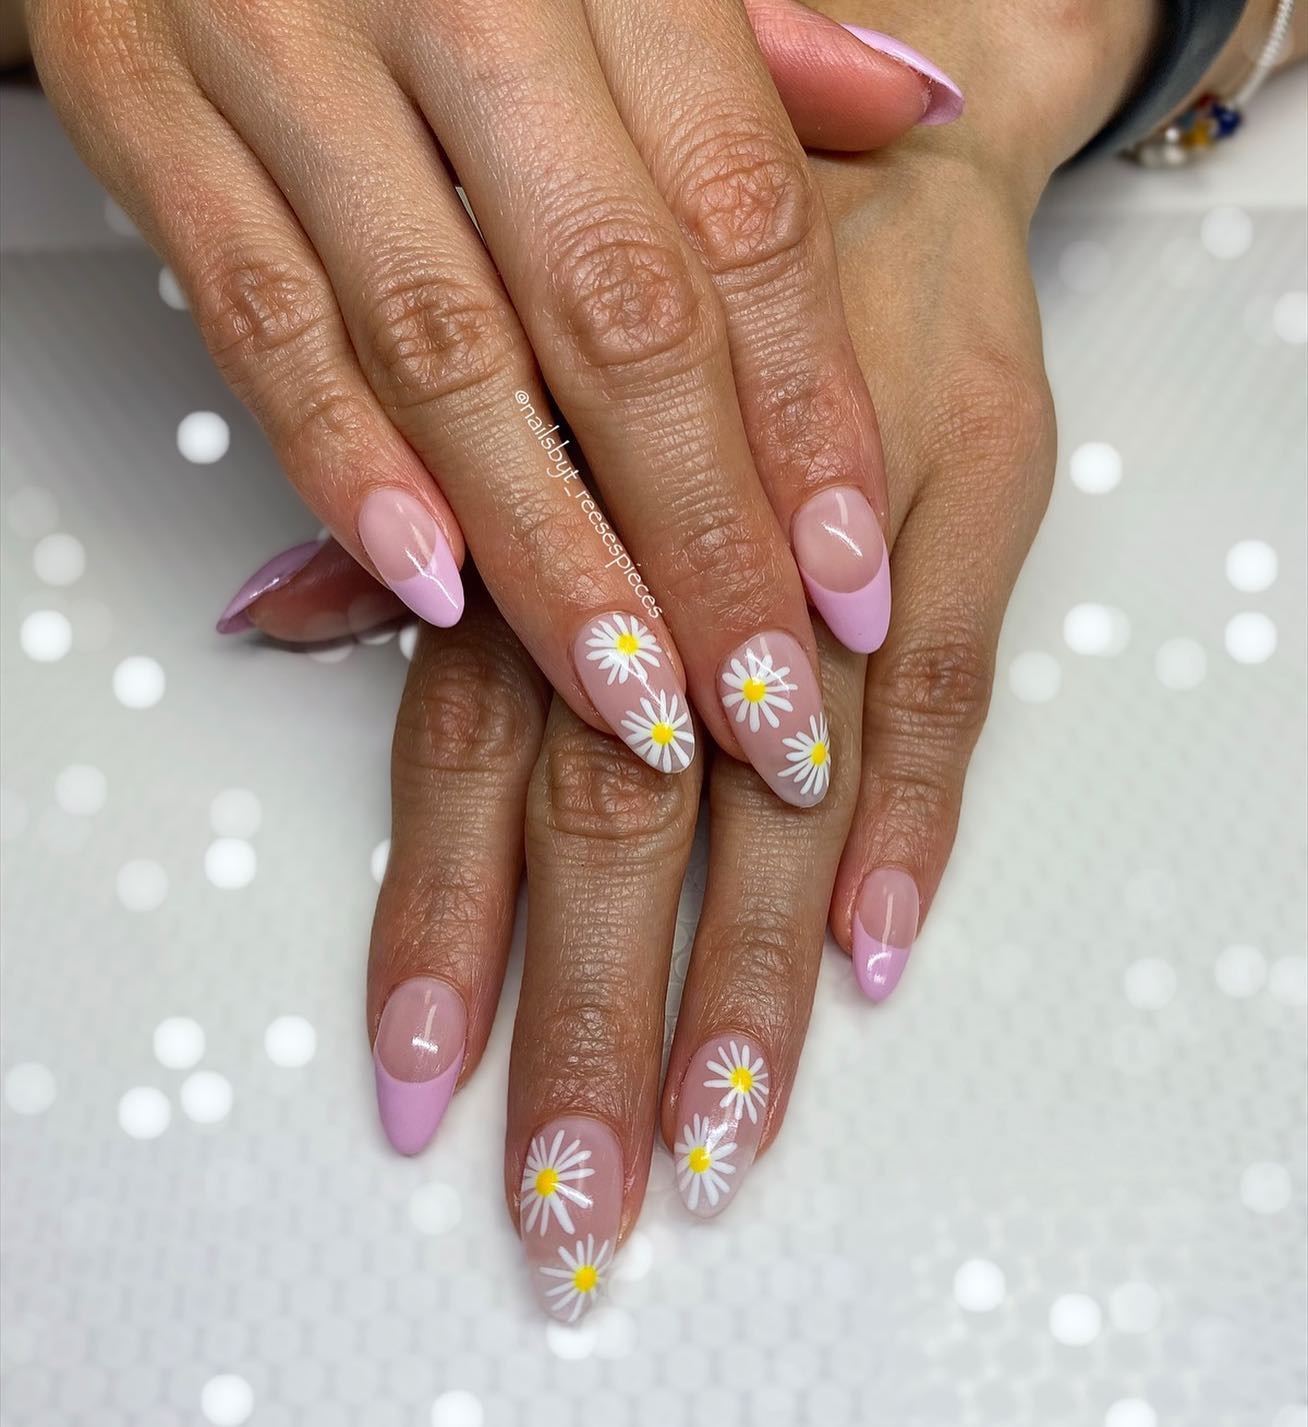 Flower lovers, here is a great accent nail design for you. Mixing daisy accent nails with lilac french tips is a good idea!